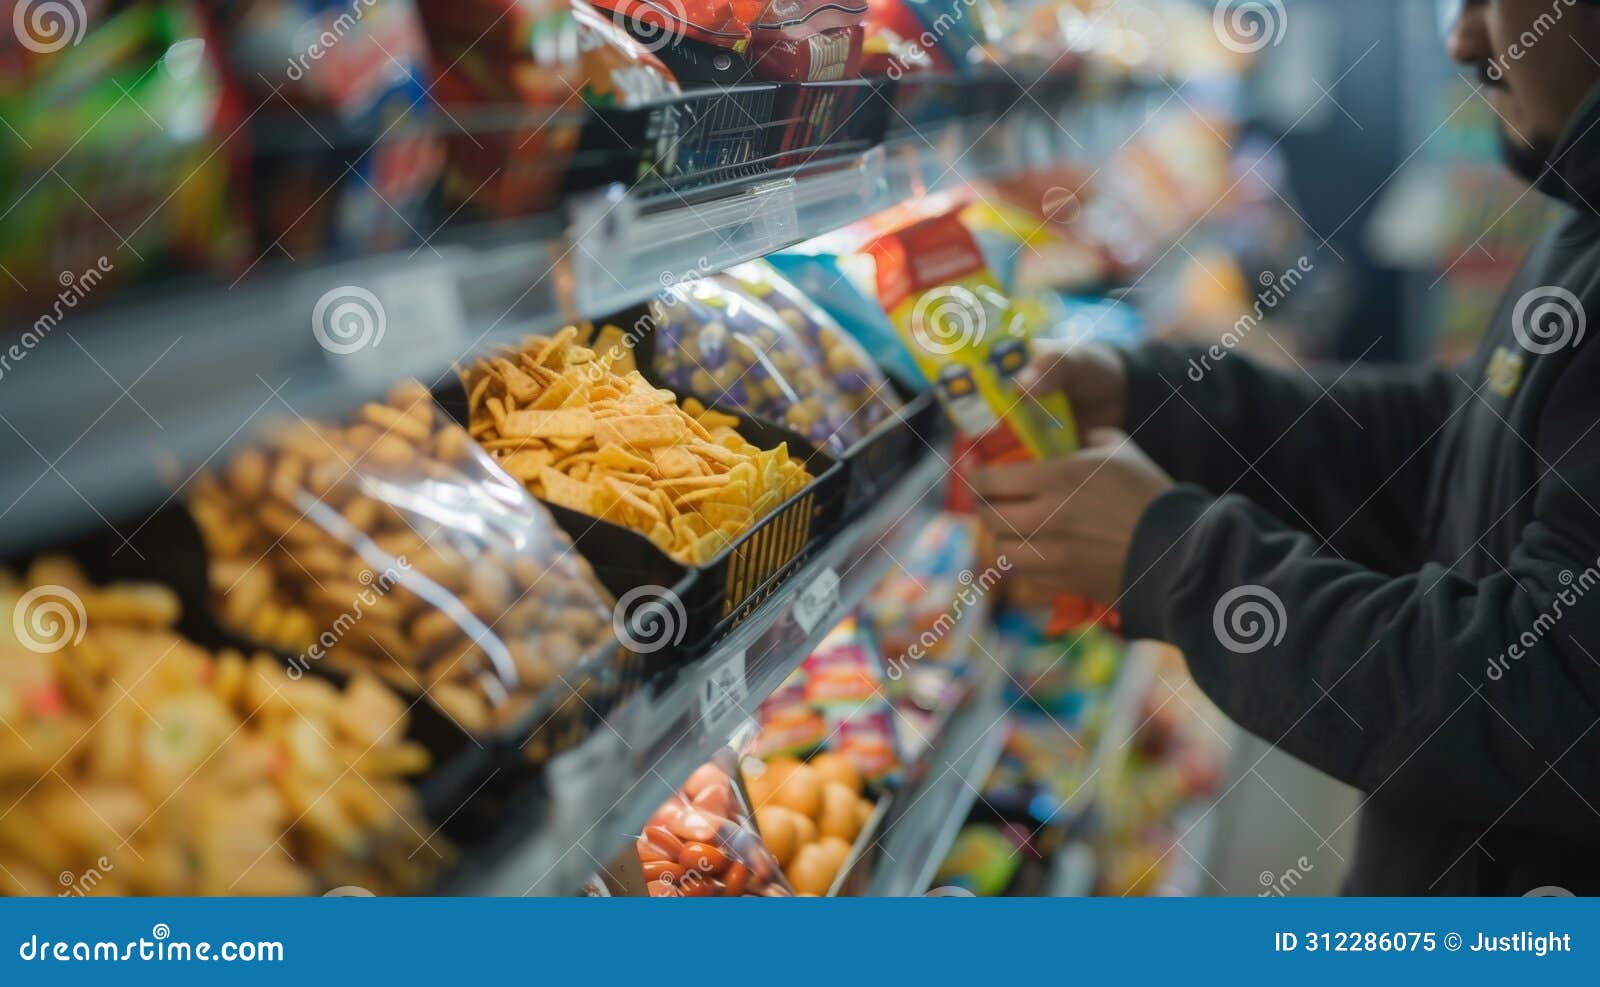 a worker replenishing the shelves of snacks and candy at a crowded concession stand making sure theres enough for